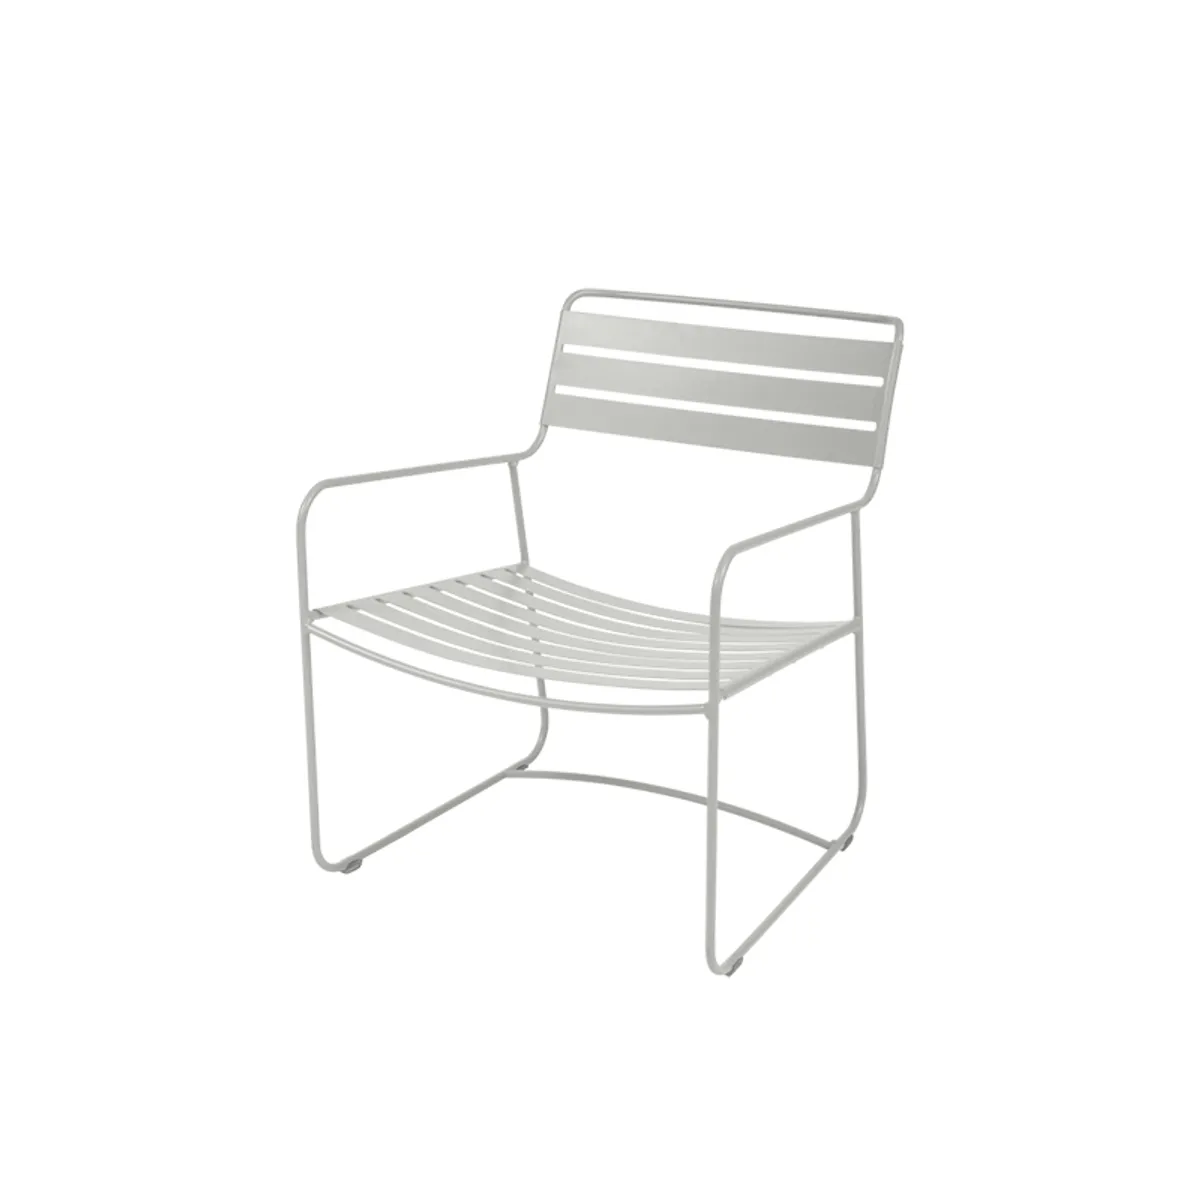 Surprising Outdoor Lounge Chair Inside Out Contracts White